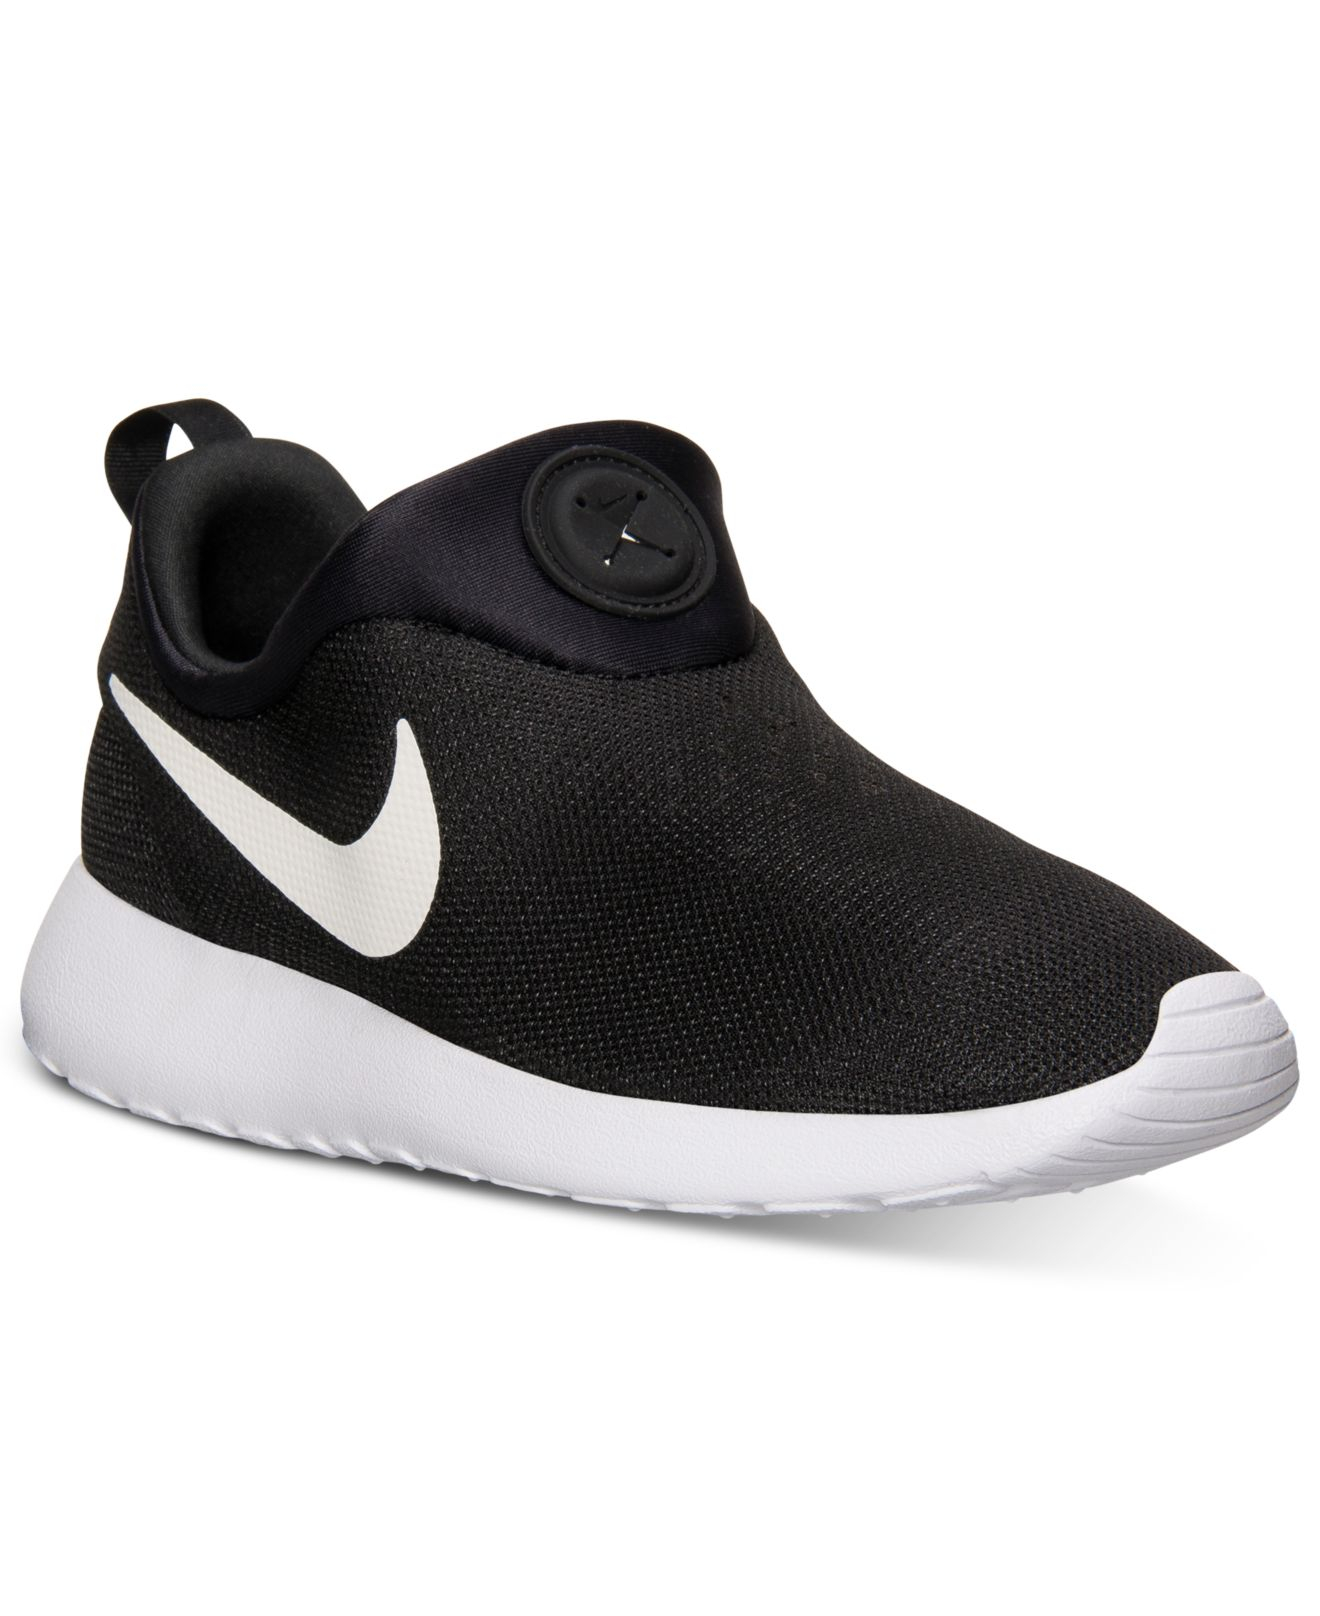 Lyst - Nike Mens Roshe Run Slip On Casual Sneakers From Finish Line in ...